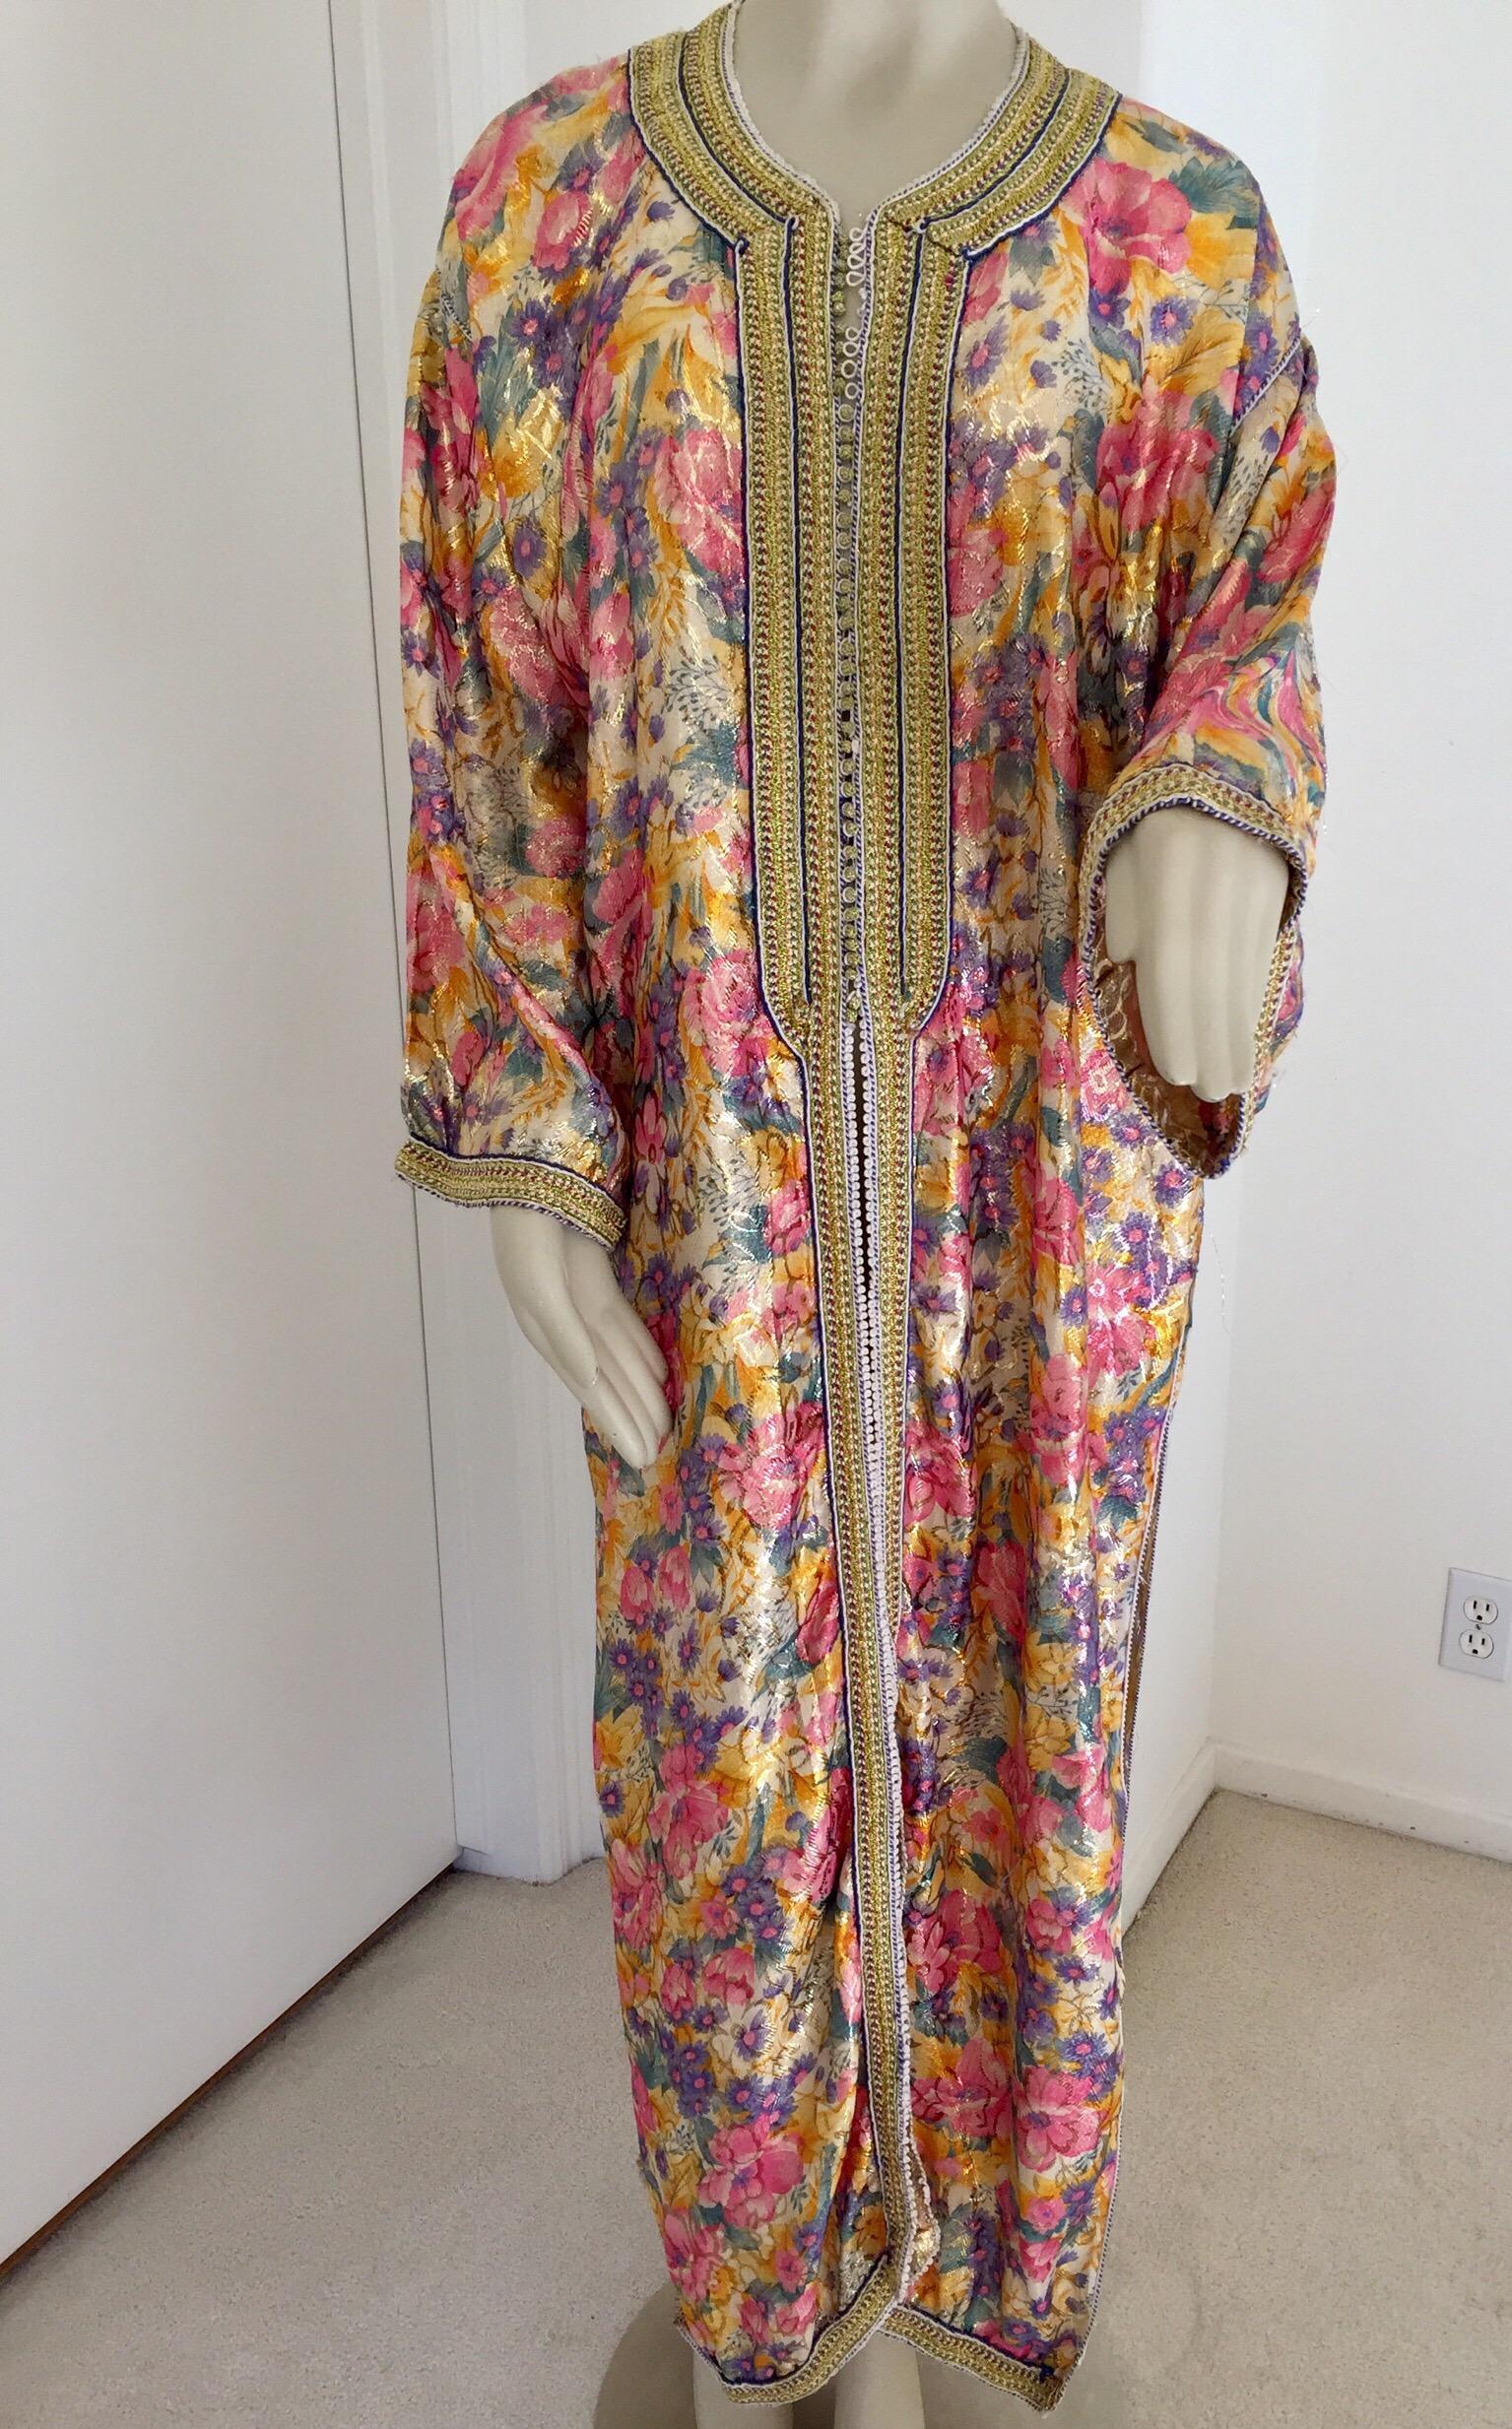 Elegant Moroccan caftan metallic silk floral brocade,
circa 1970s.
This light summery caftan is crafted in Morocco and tailored for a relaxed fit, features a traditional neckline, embellished sleeves and vented sides.
This long maxi dress kaftan is